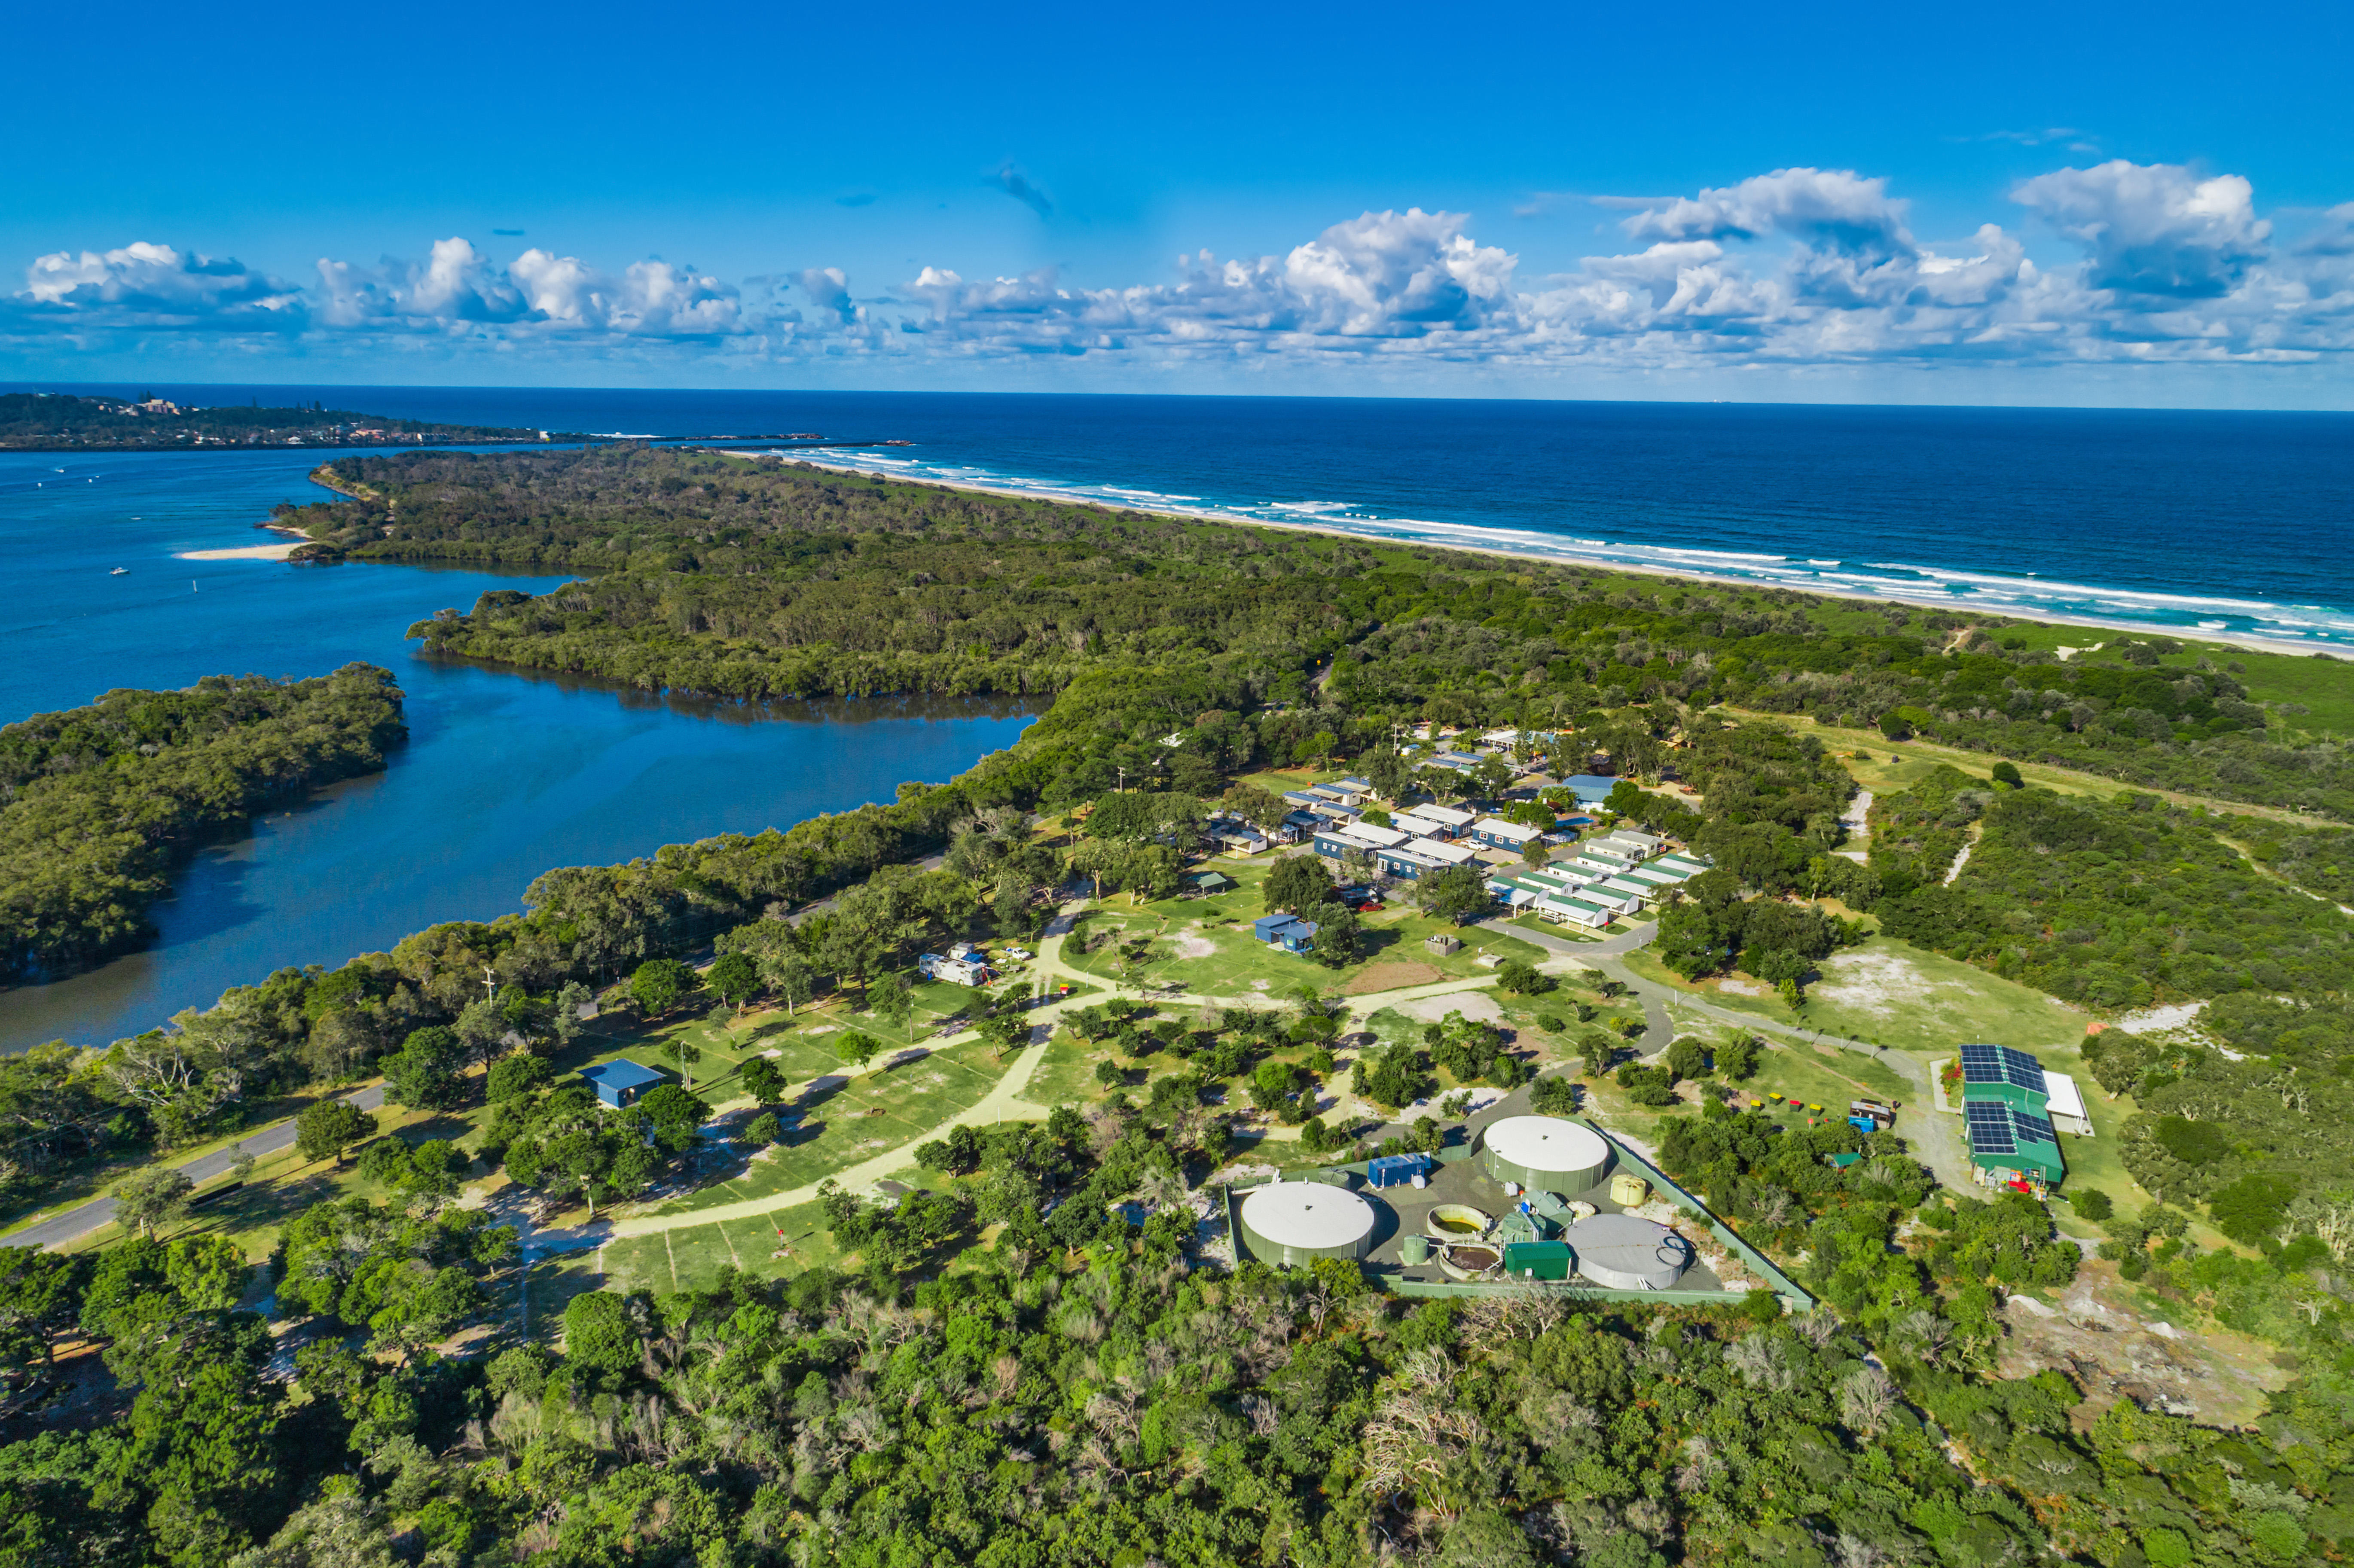 Ballina Beach Nature Resort - secluded, peaceful and quiet